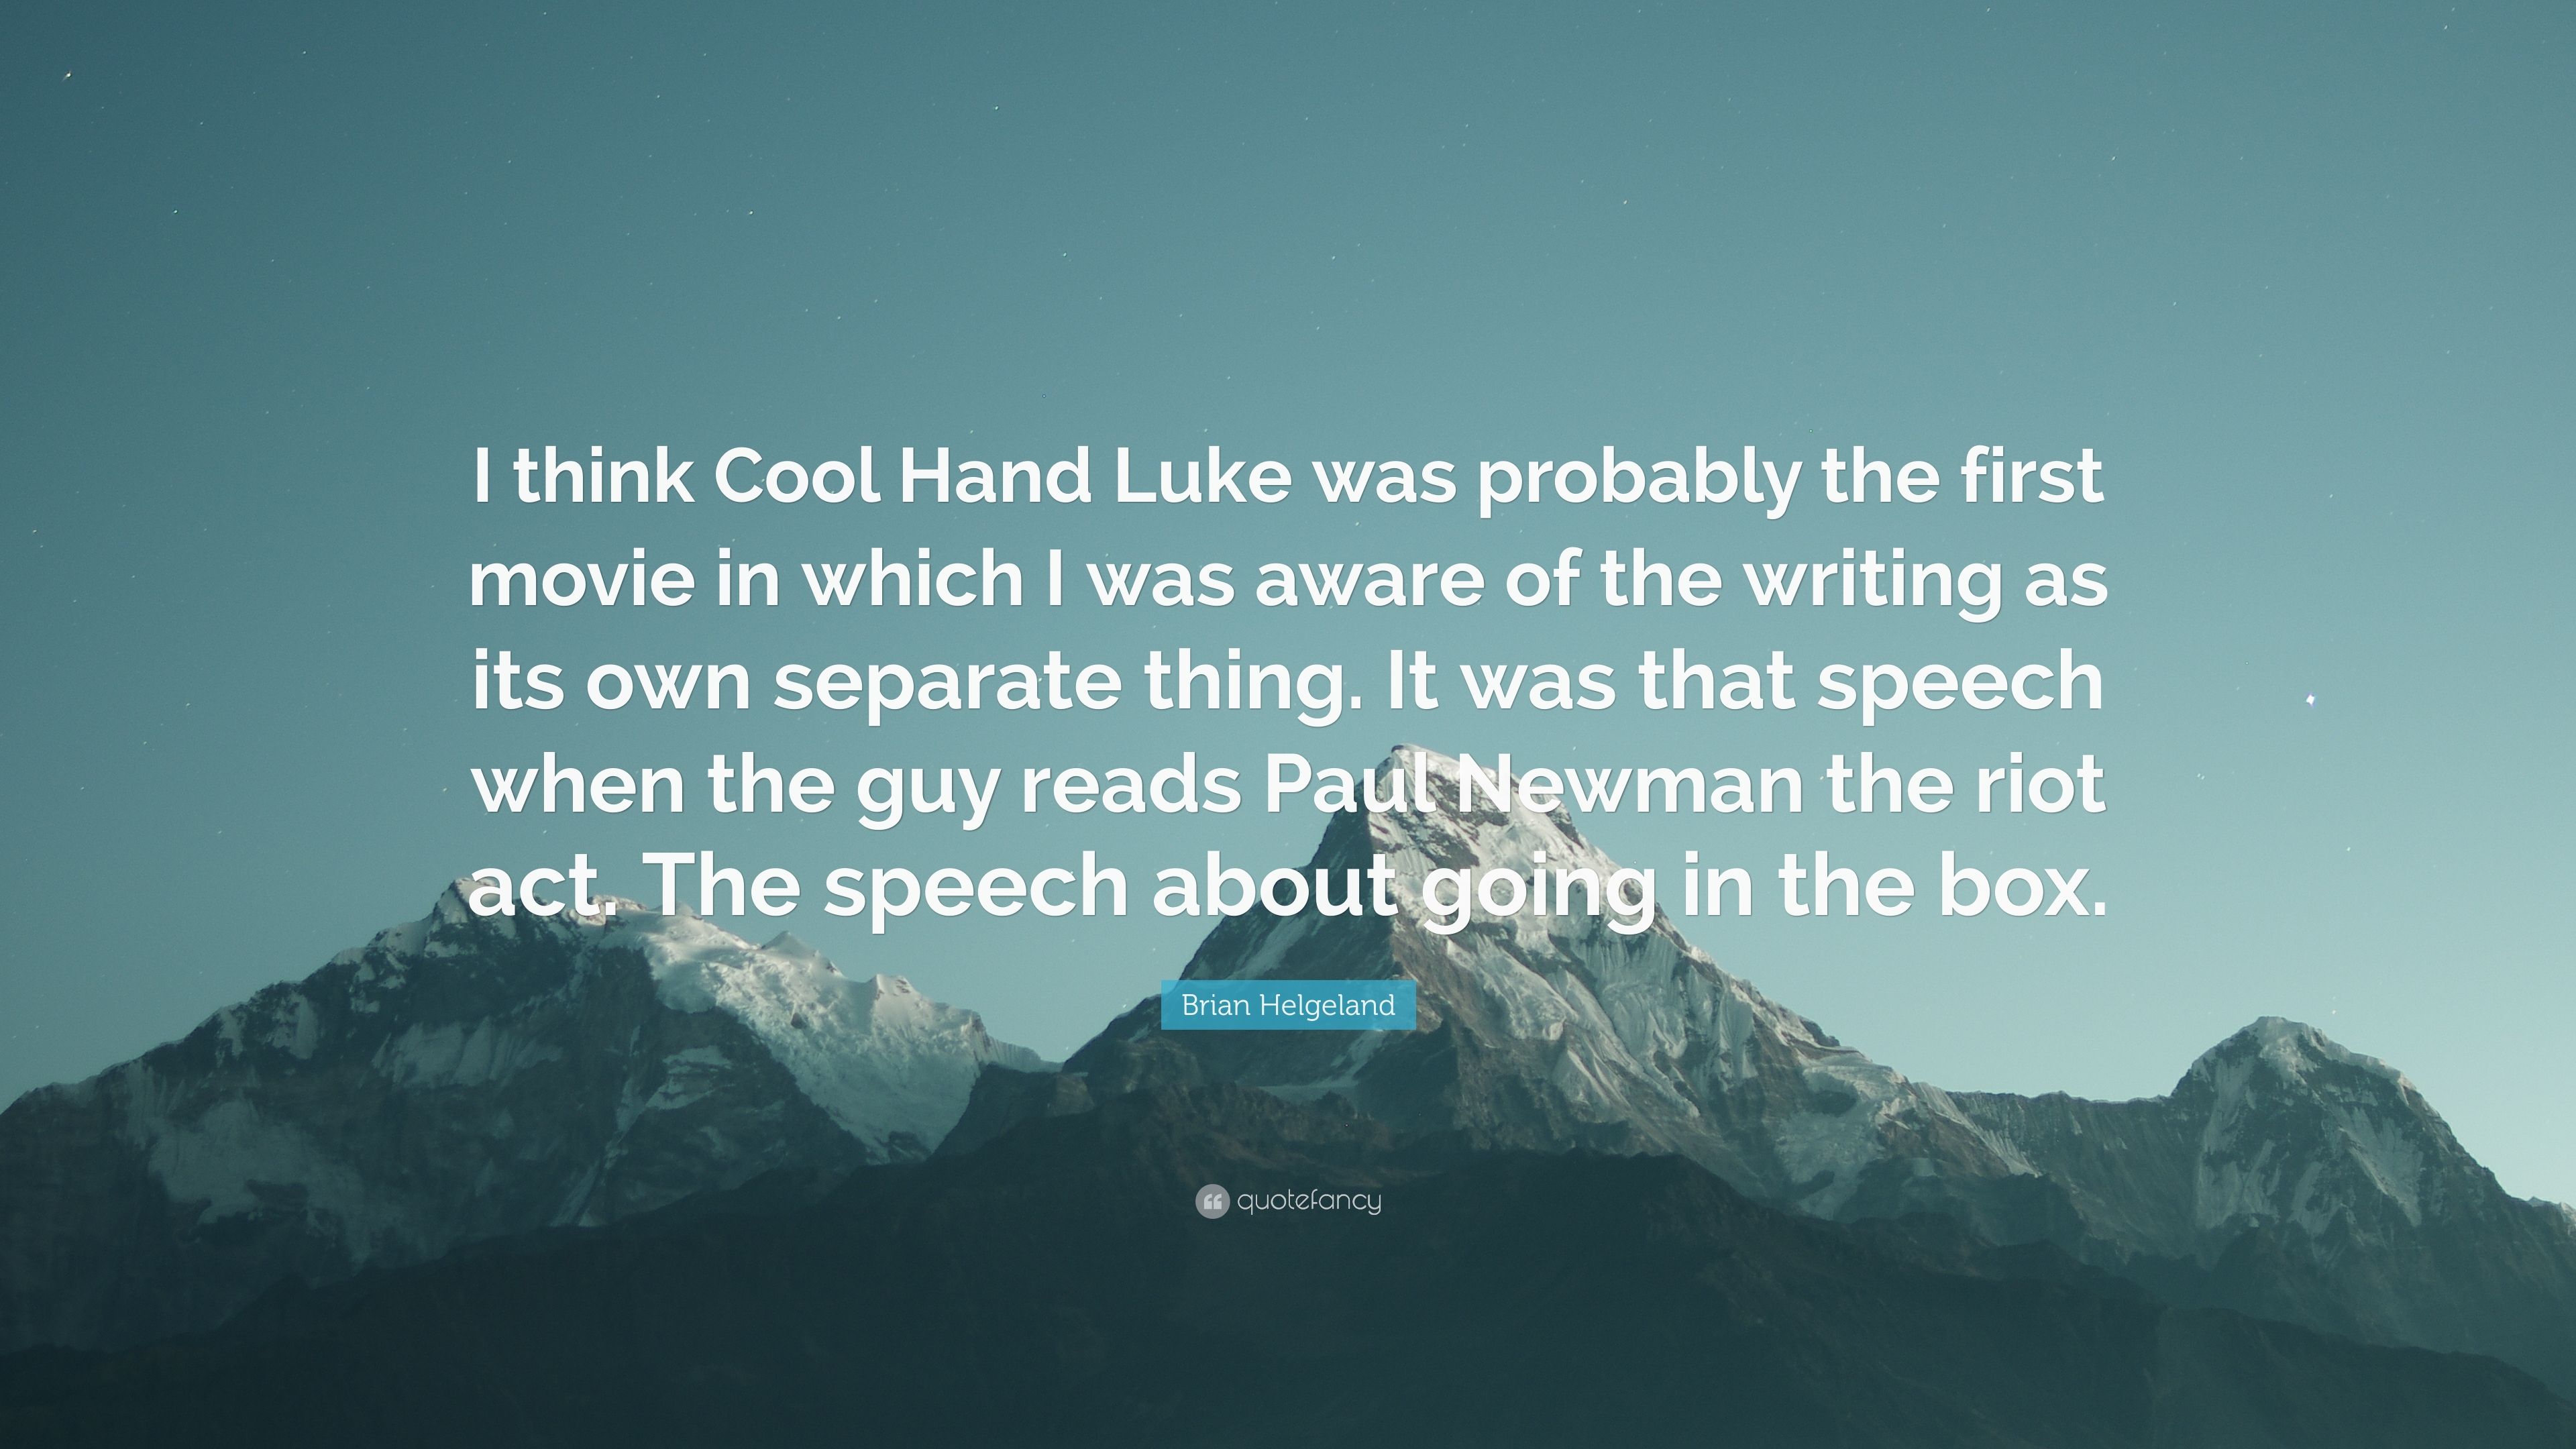 Brian Helgeland Quote: “I think Cool Hand Luke was probably the first movie in which I was aware of the writing as its own separate thing. It wa.” 7 wallpaper